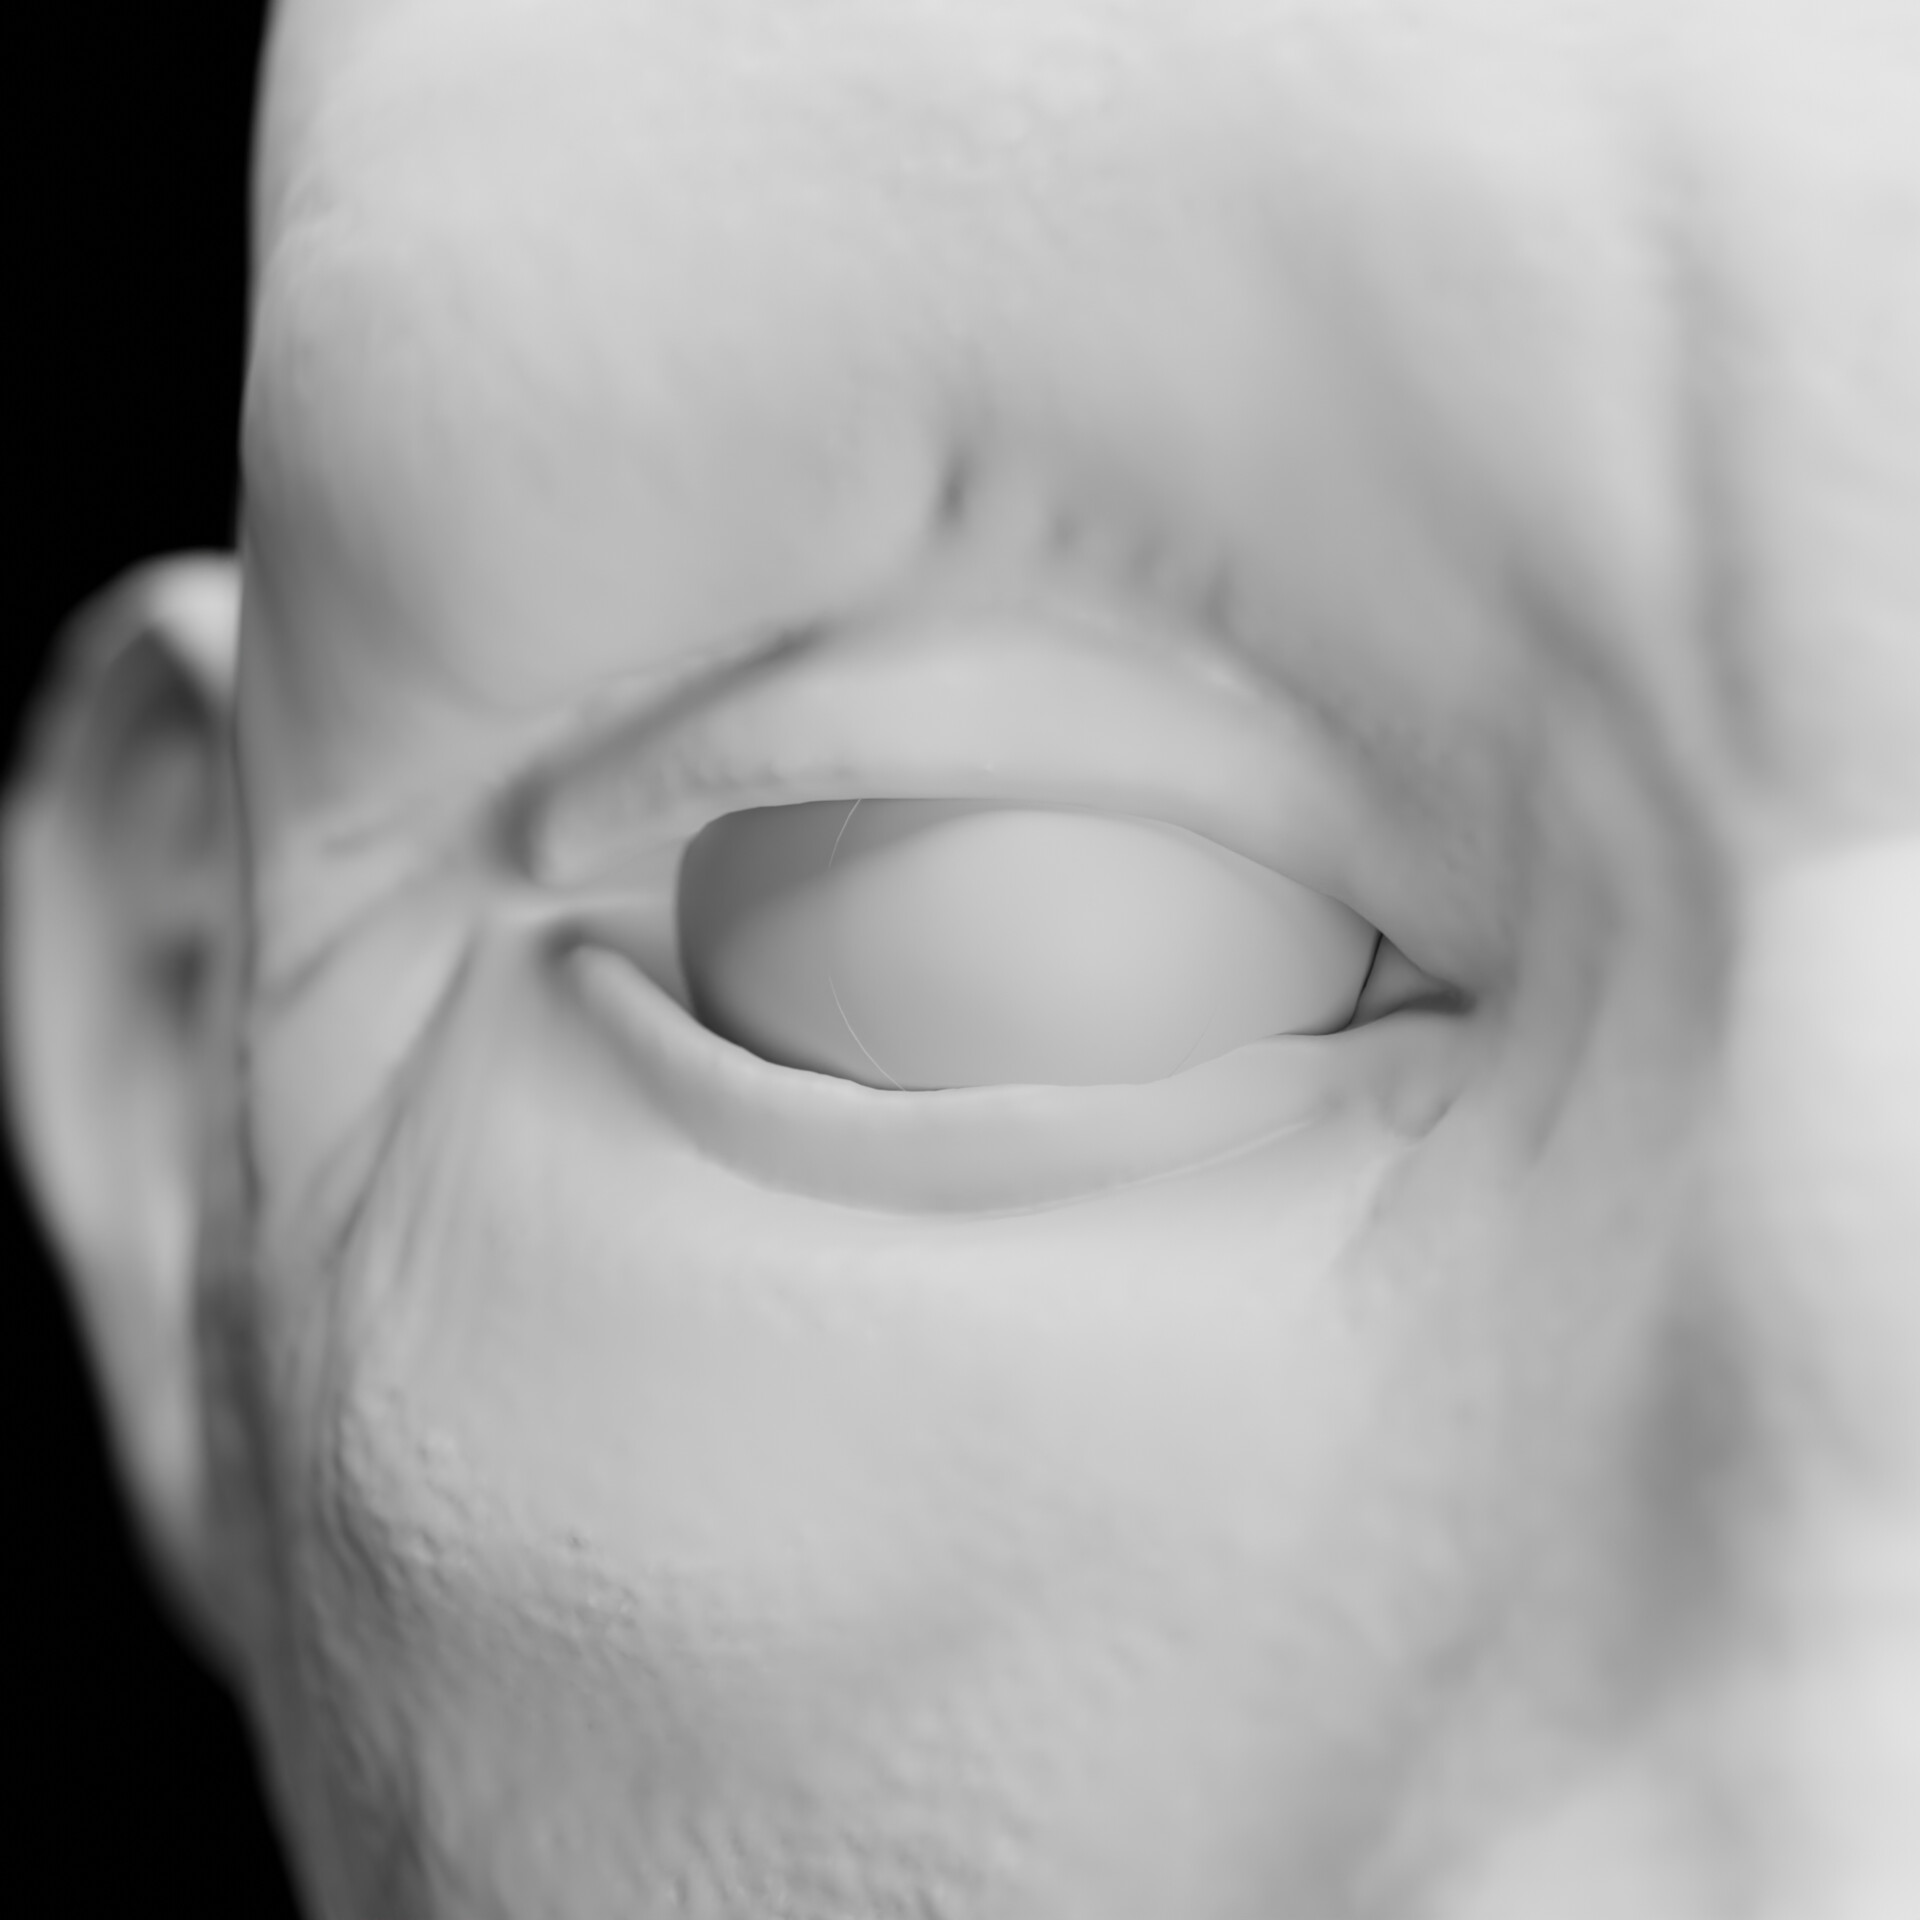 Human Head Sculpt made with Blender by KauheeApina on DeviantArt